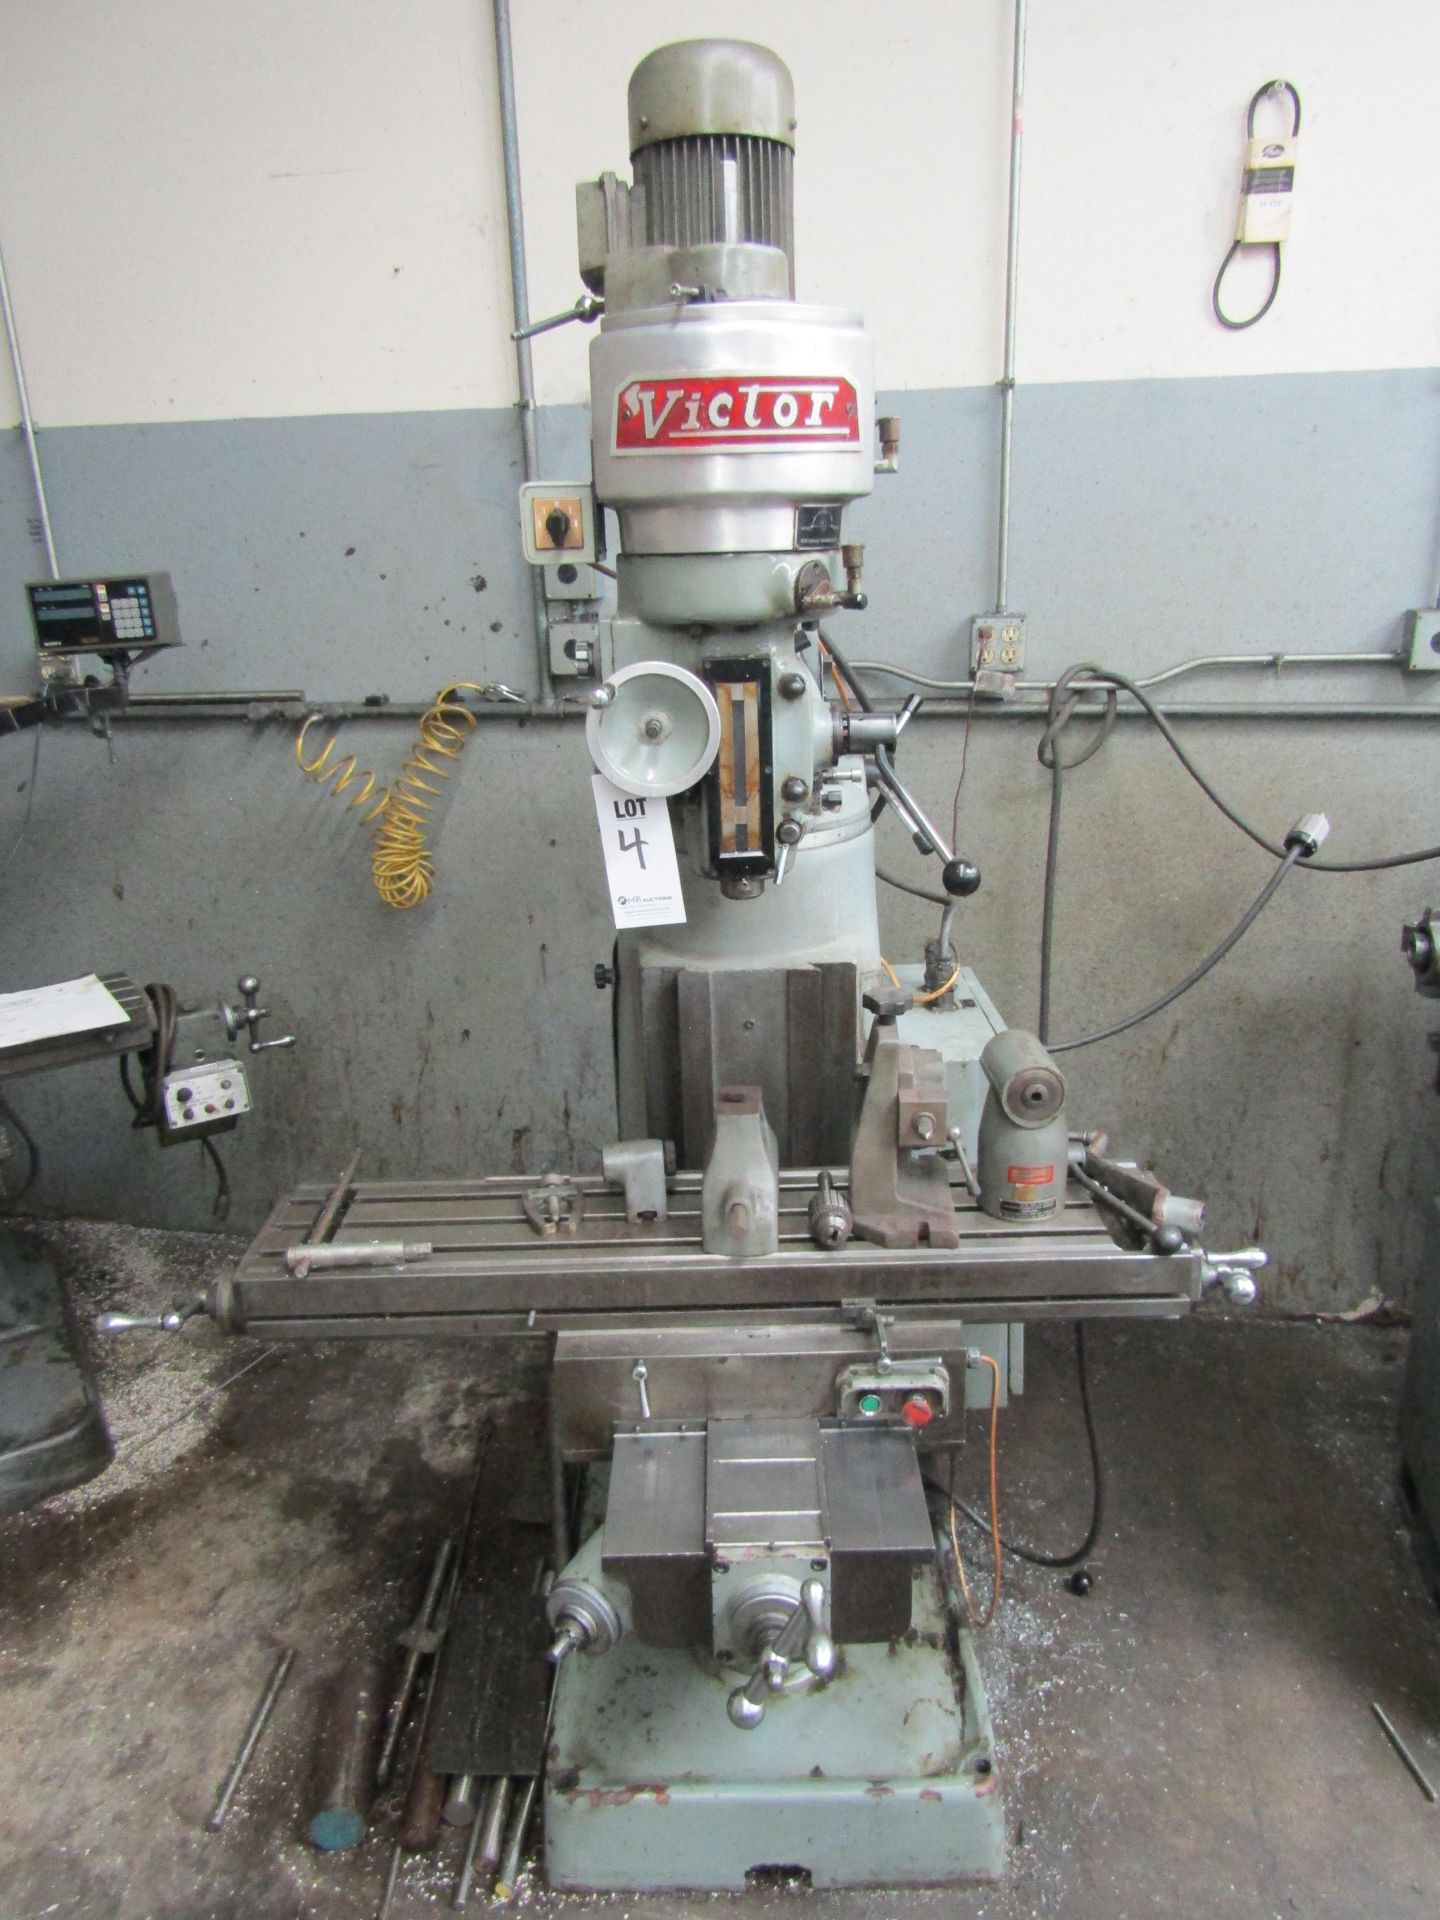 VICTOR VERTICAL MILLING MACHINE, 10" X 44", TO INCLUDE MISC. ATTACHMENTS